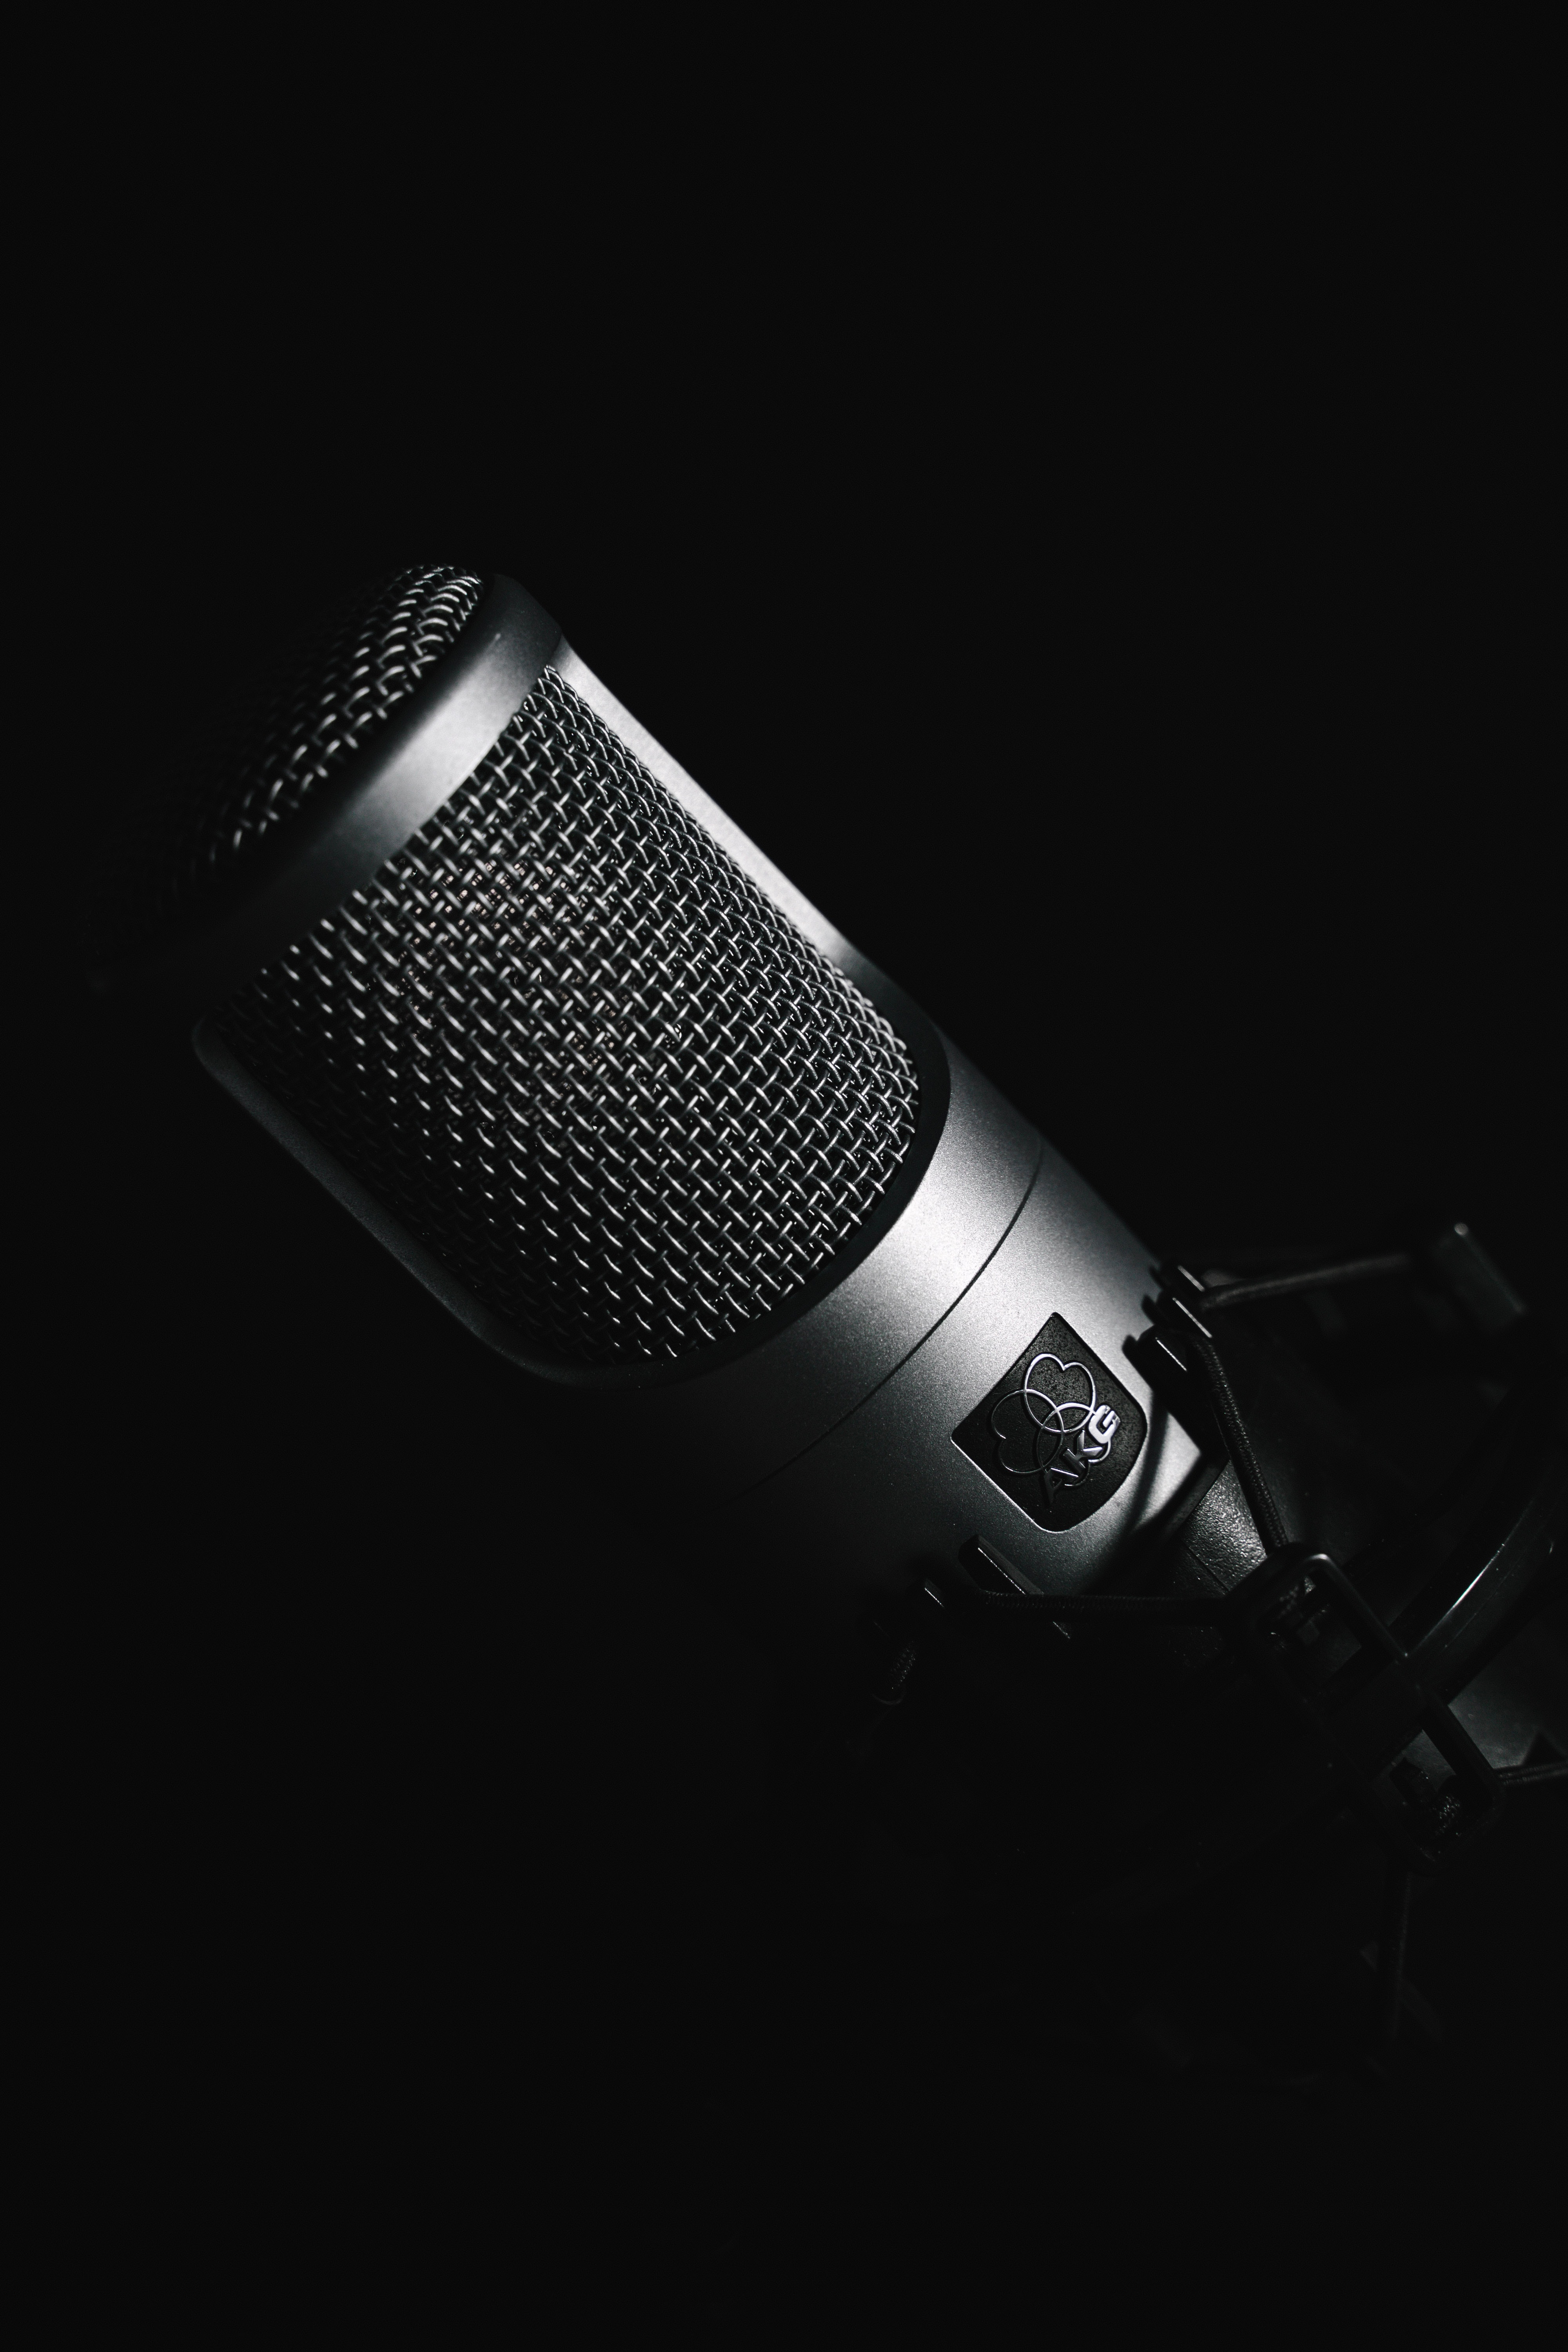 black and white, technologies, microphone, music, technology